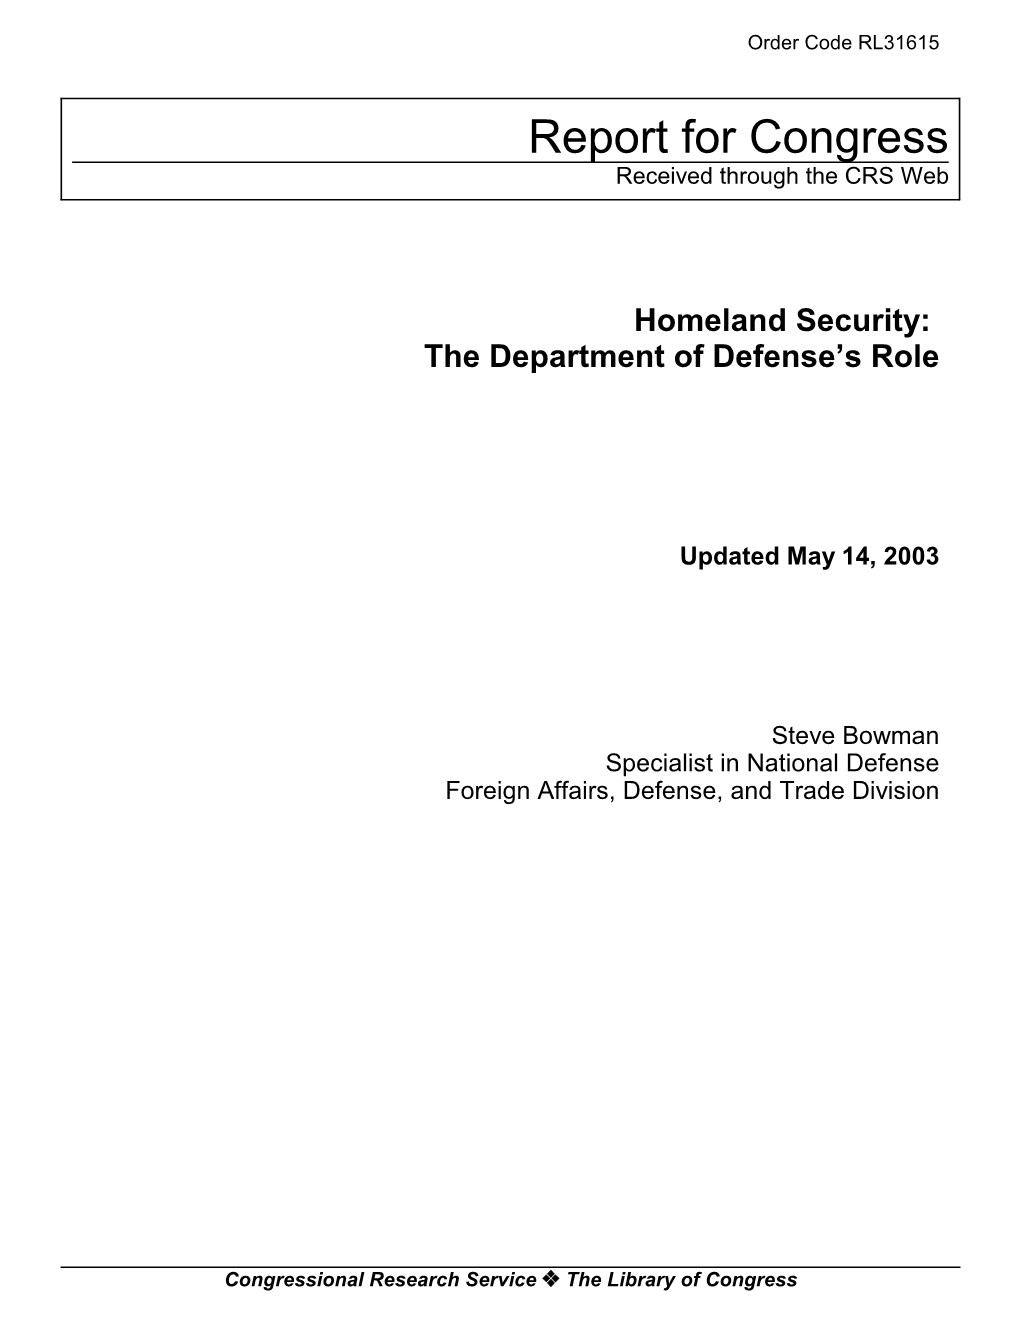 Homeland Security: the Department of Defense’S Role